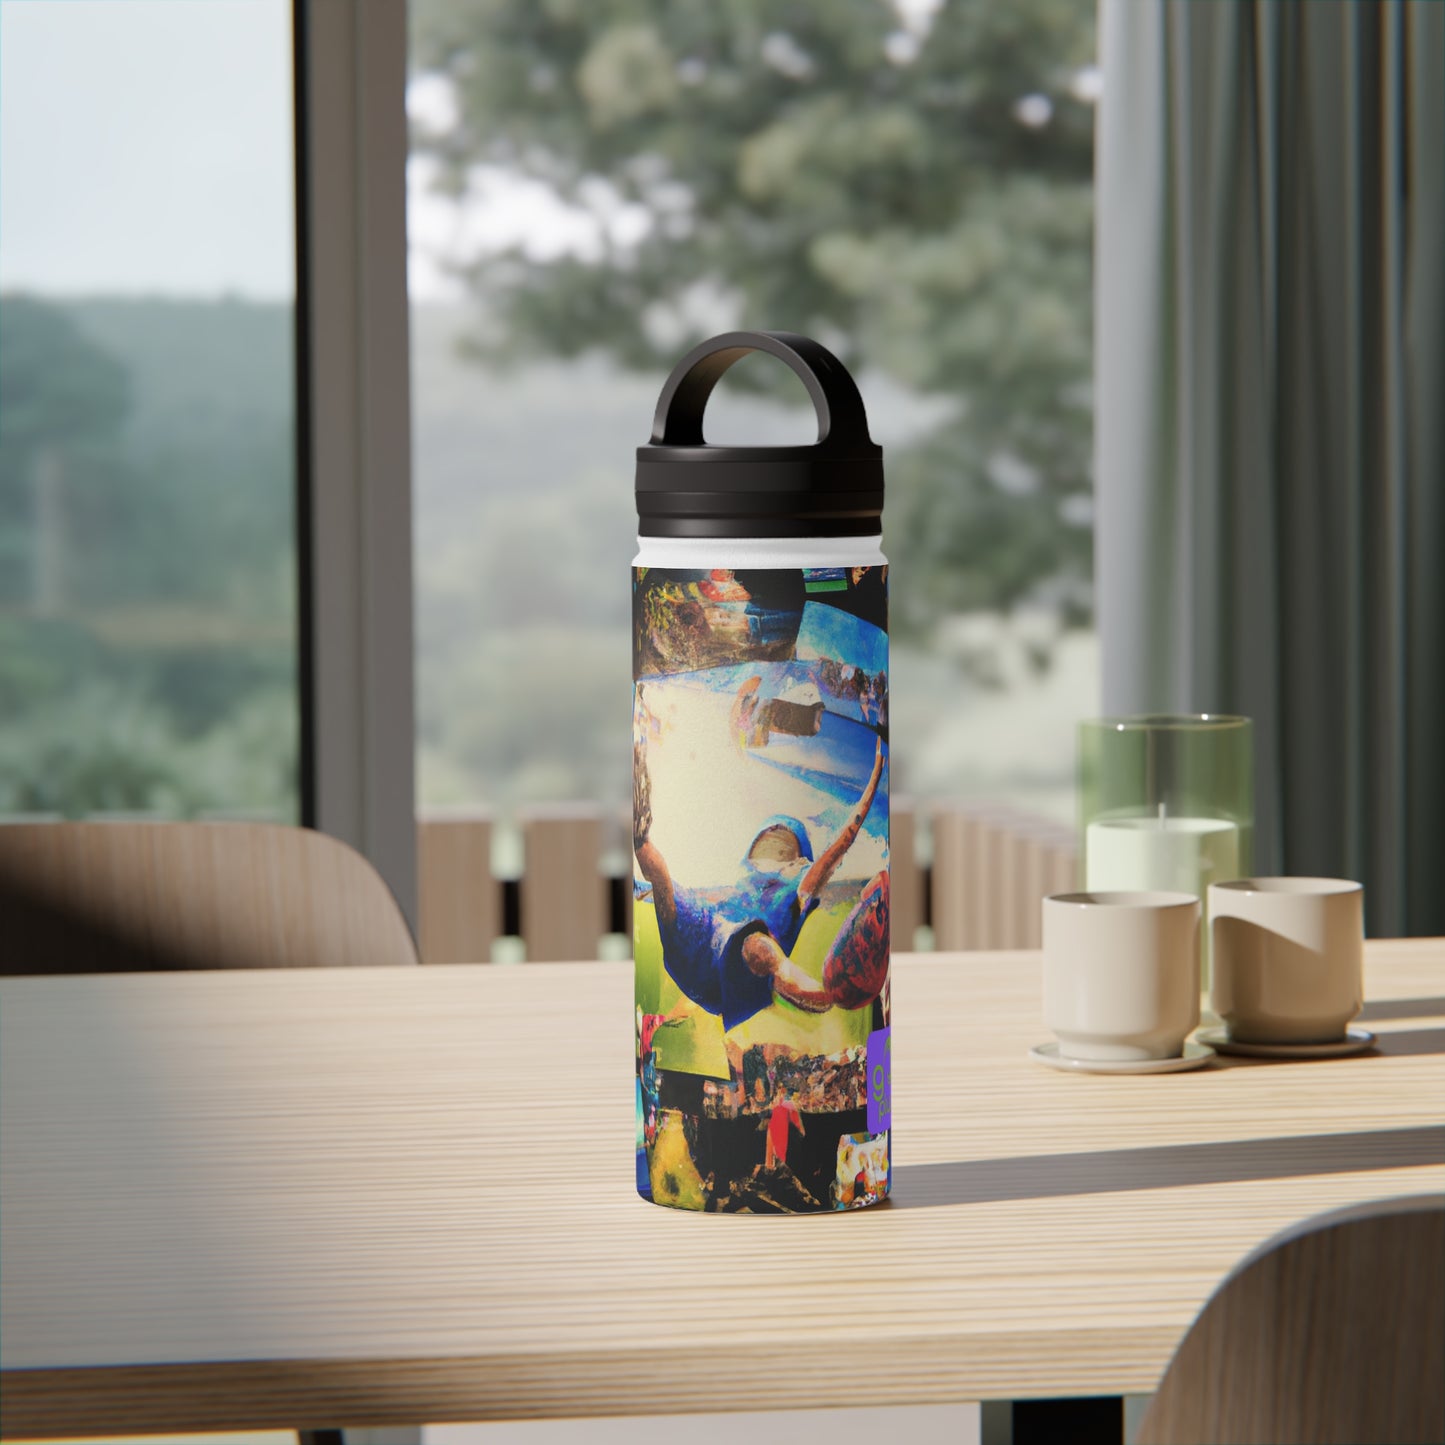 "Sports Passion Composite" - Go Plus Stainless Steel Water Bottle, Handle Lid